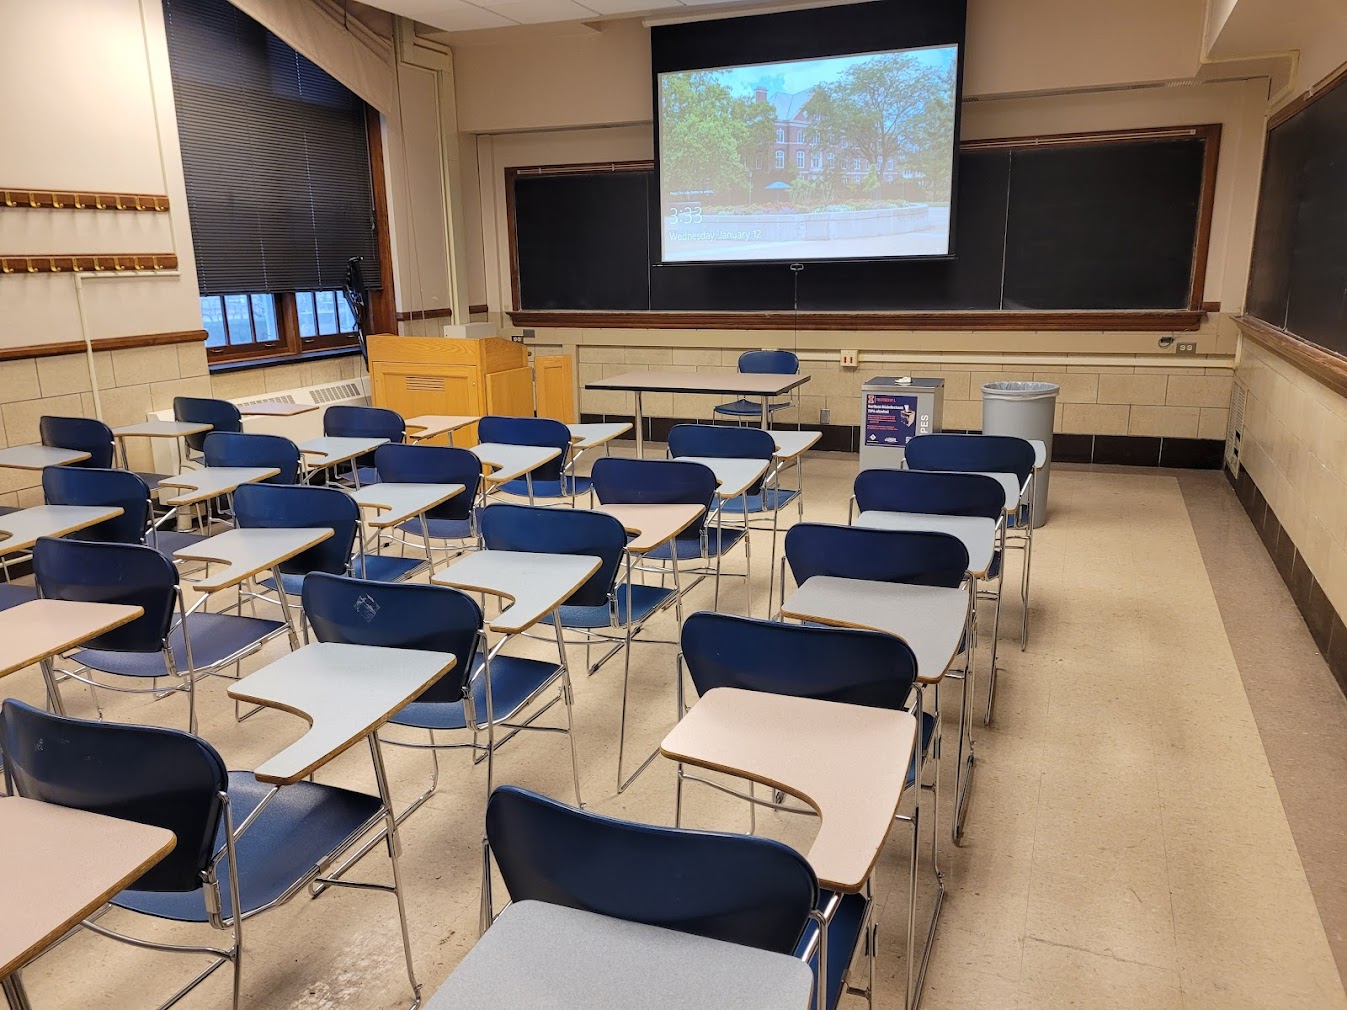 A view of the classroom with movable tablet arm chairs, chalkboard, and instructor table in front.